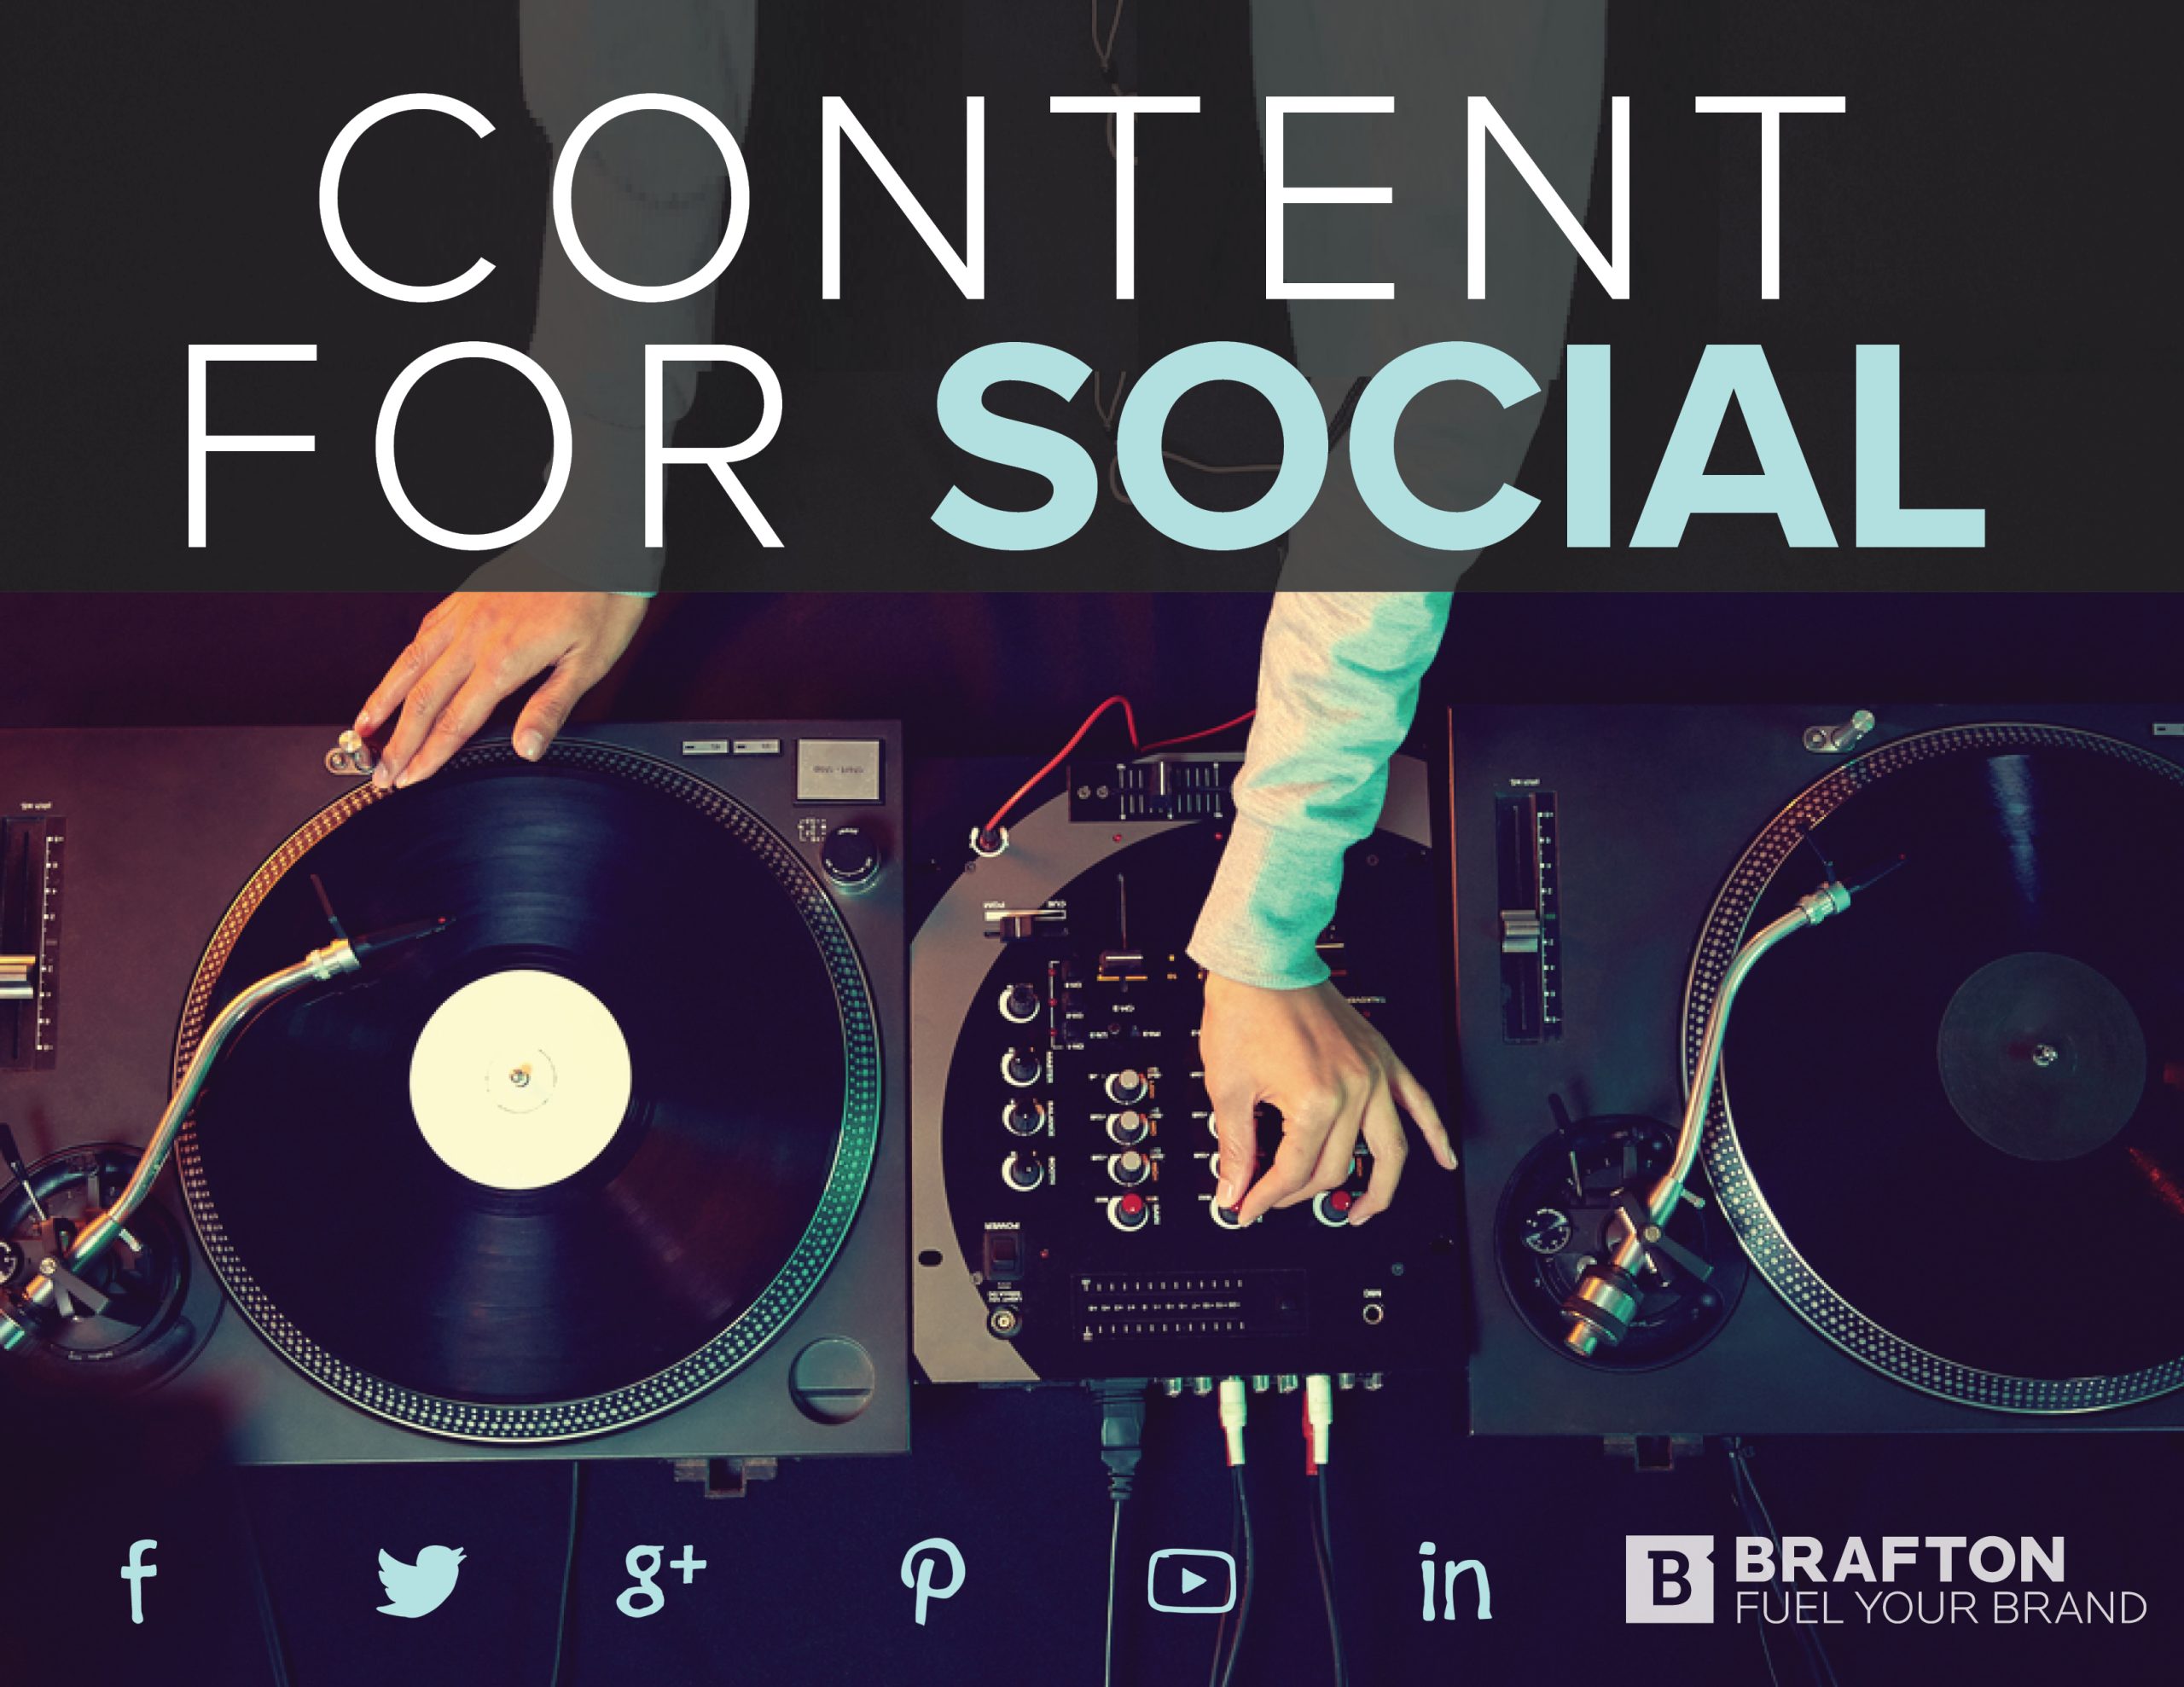 This eBook shows marketers how to create content for social media campaigns.